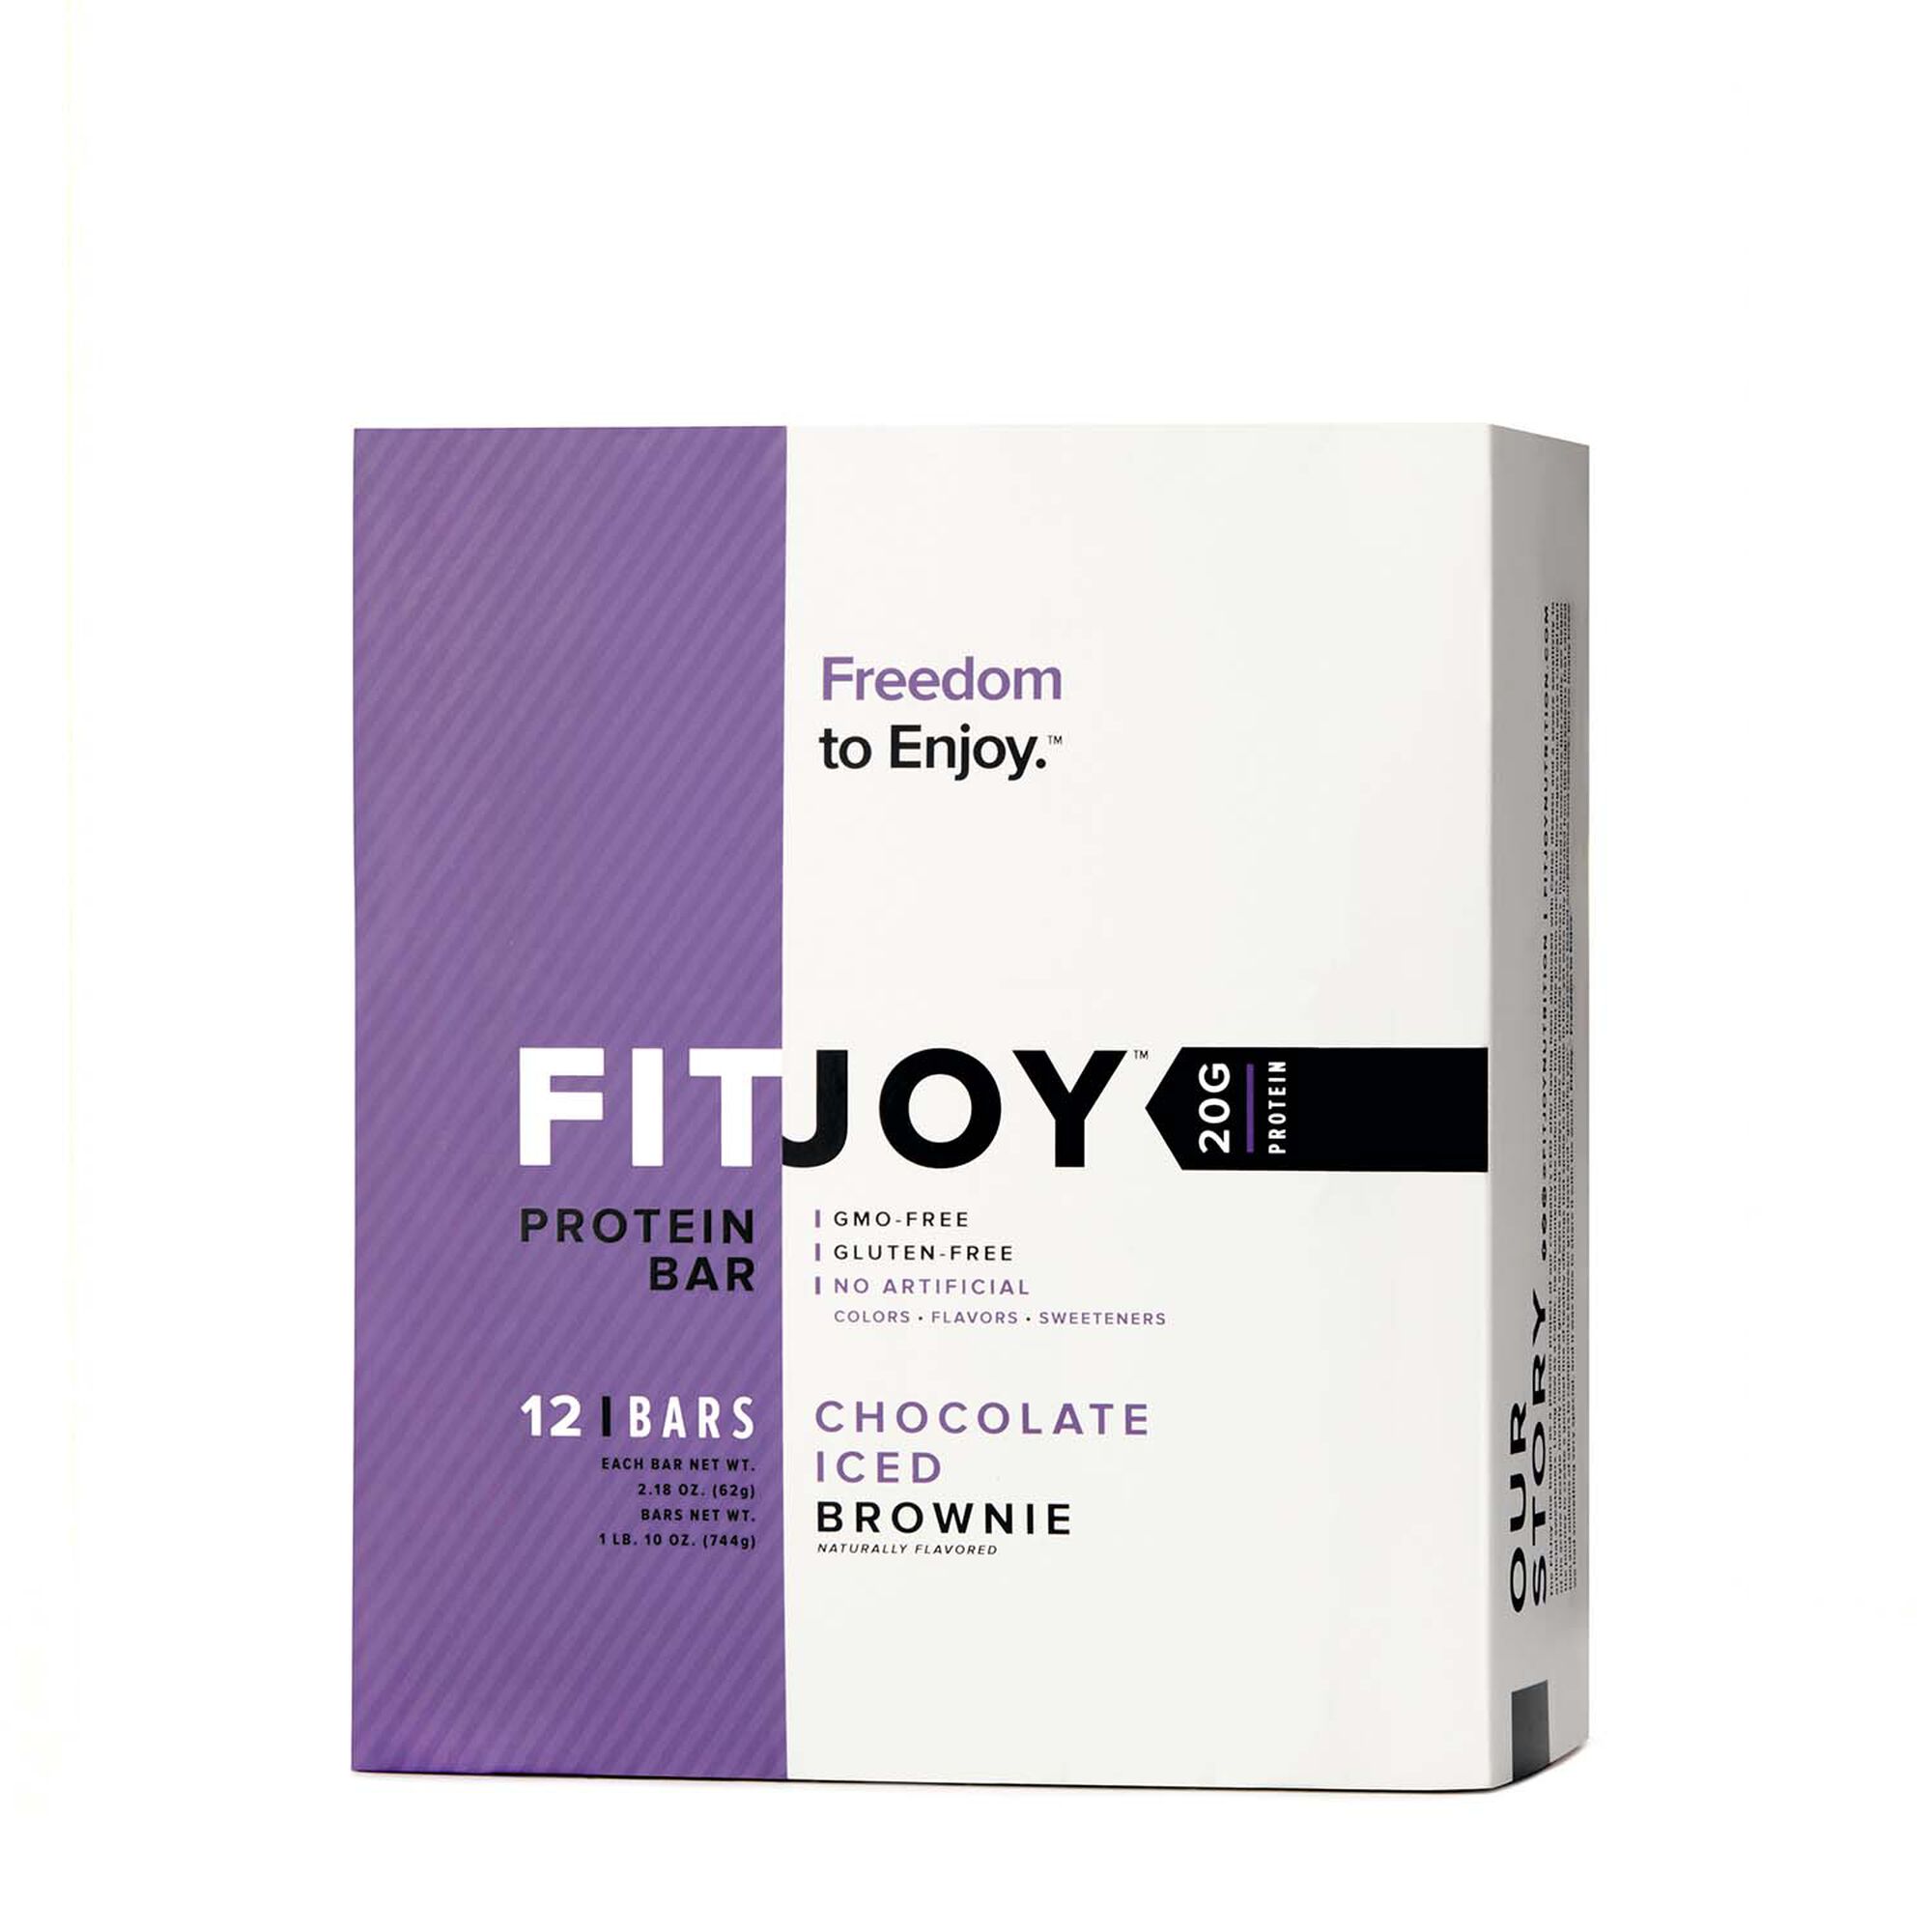 Protein Bar - Chocolate Iced Brownie - 12 Bars - Fitjoy? - Protein Bars